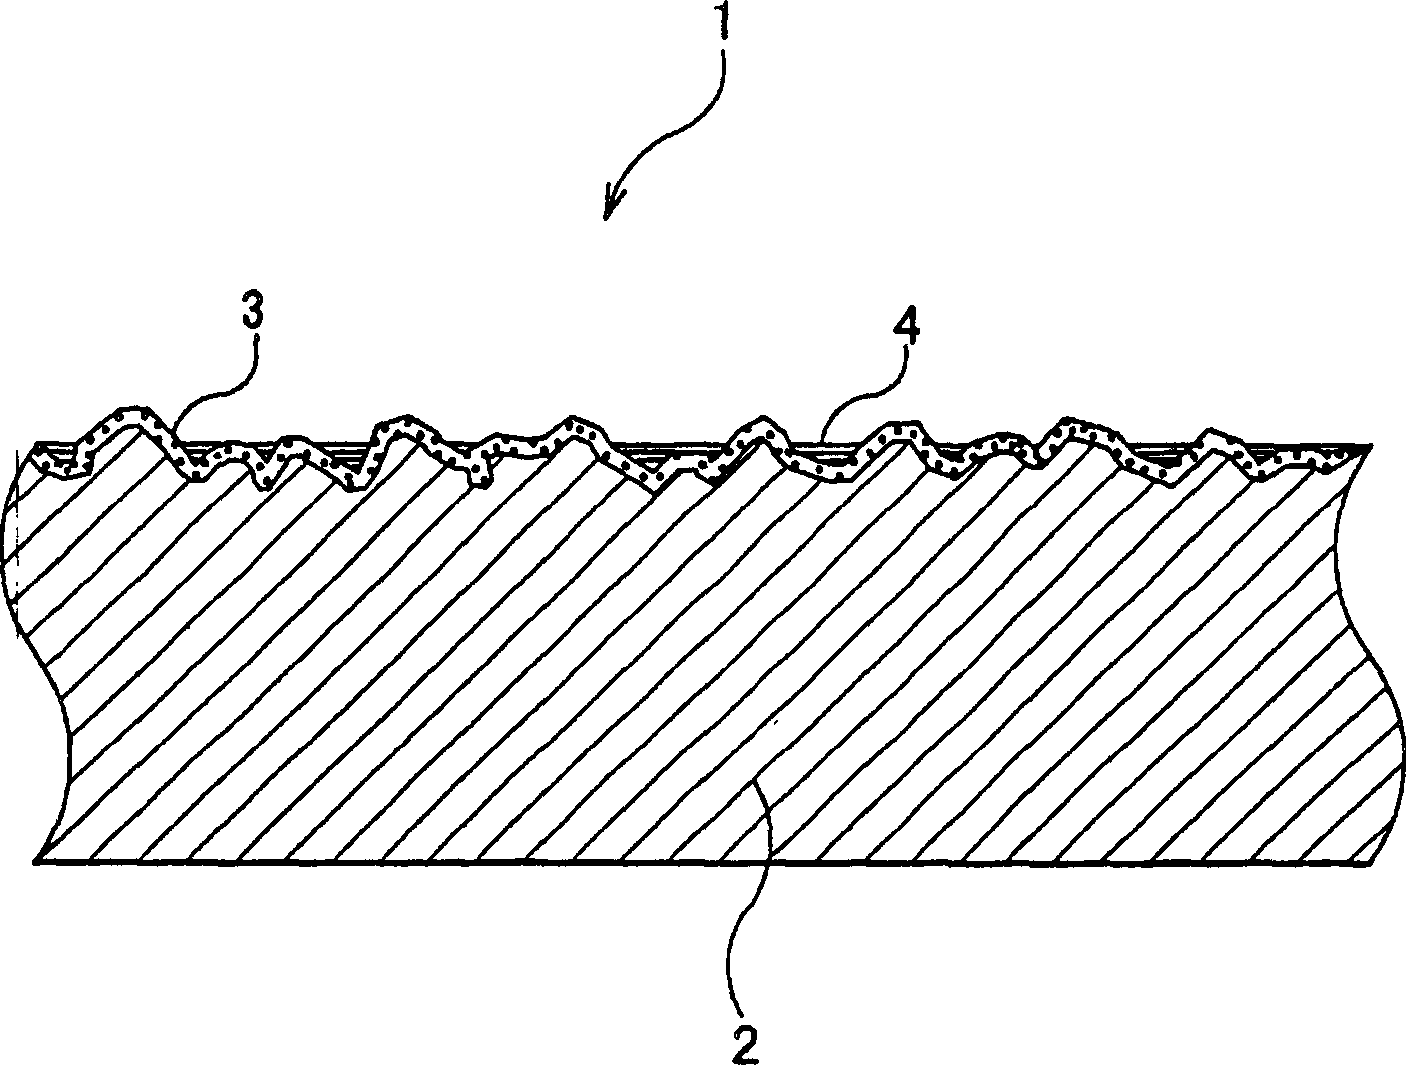 ALuminium plate with envelope and electronic equipment parts using the same